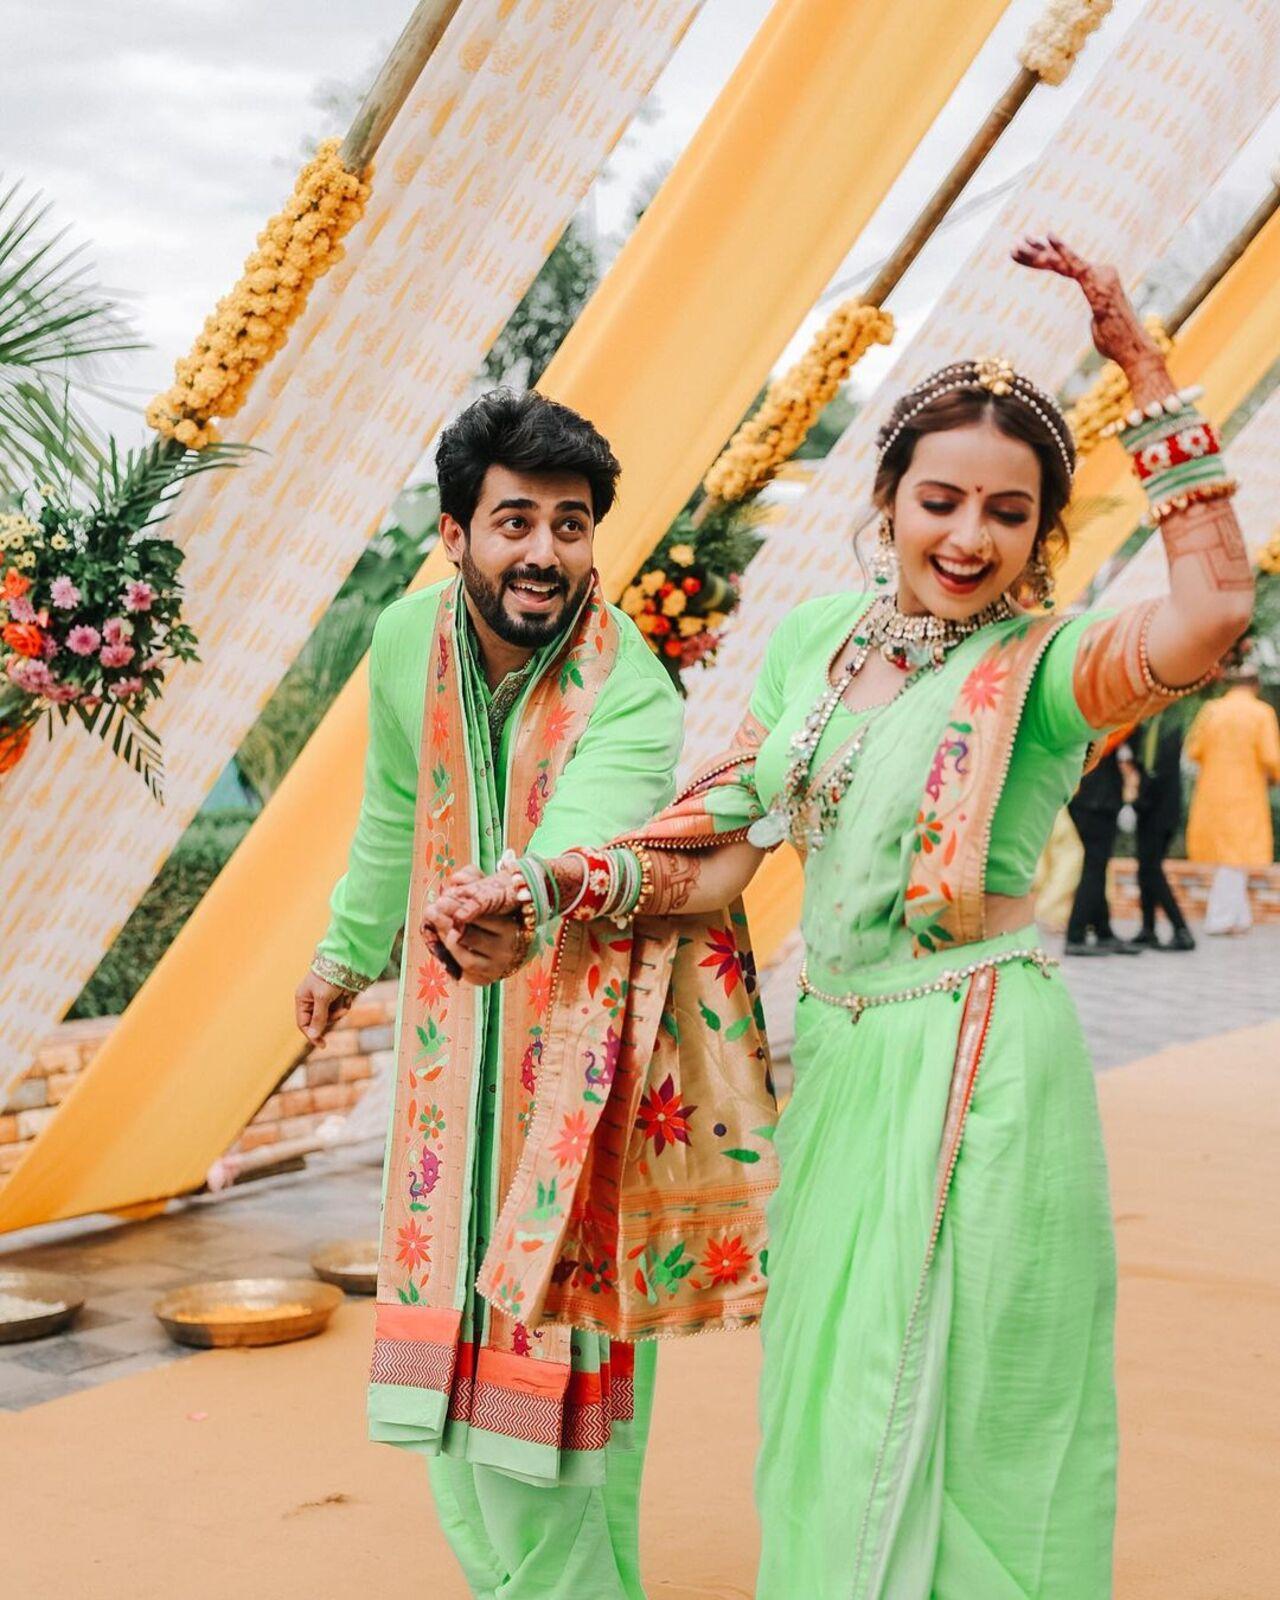 The actress is wearing a beautiful green outfit in the images. She adorned a parrot-green lehenga with an embroidered blouse, and the ruffled sleeves elevated the look